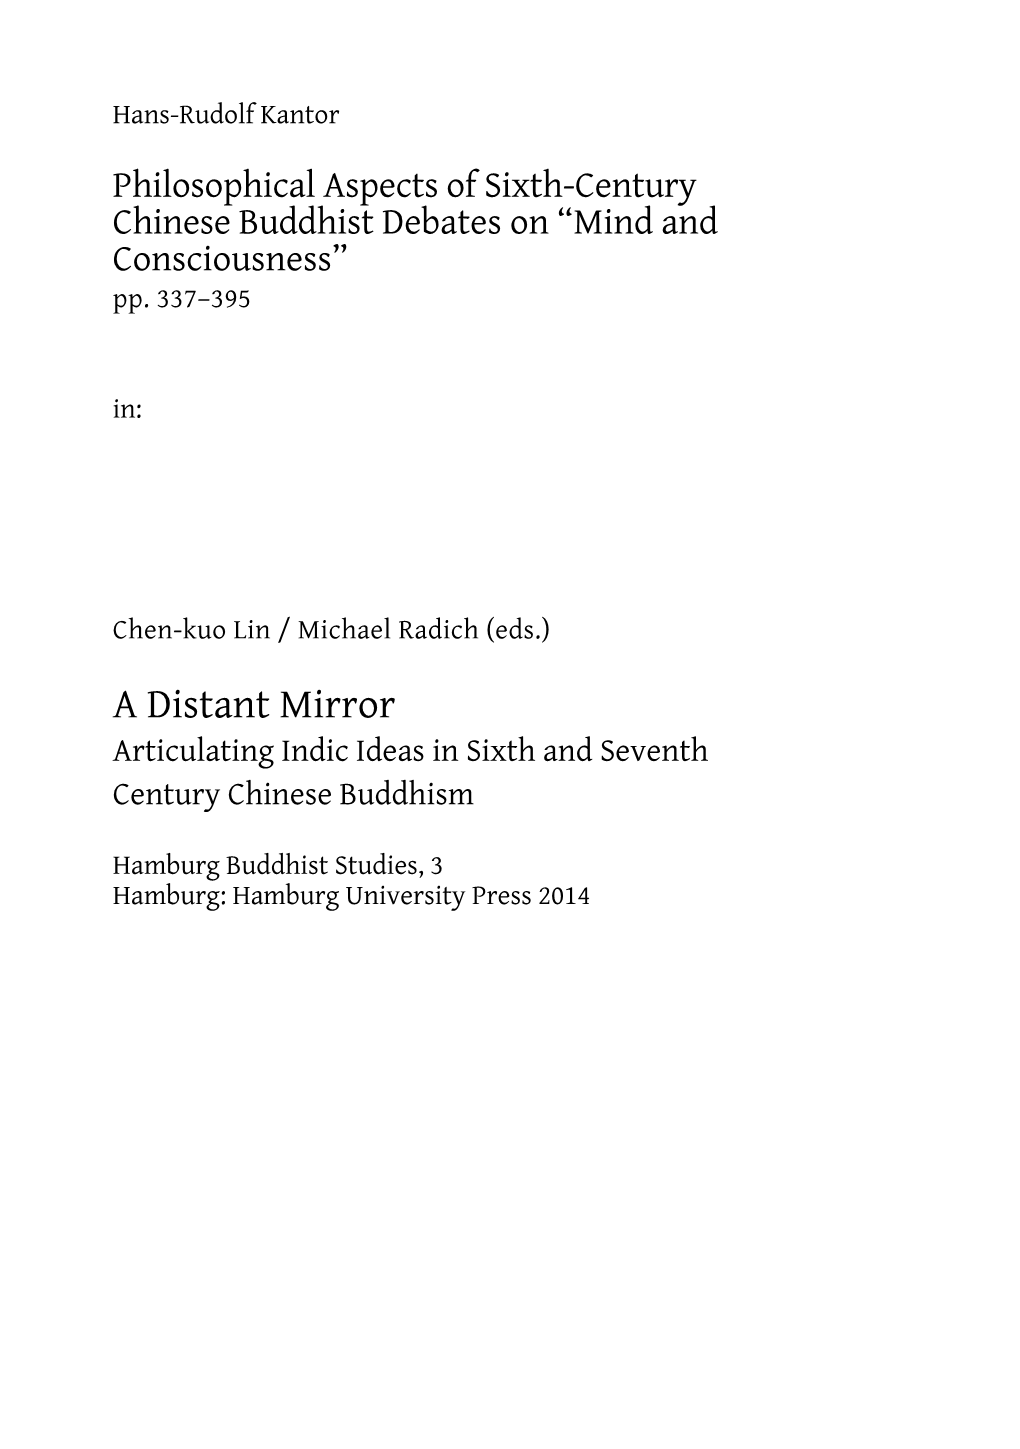 A Distant Mirror. Articulating Indic Ideas in Sixth and Seventh Century